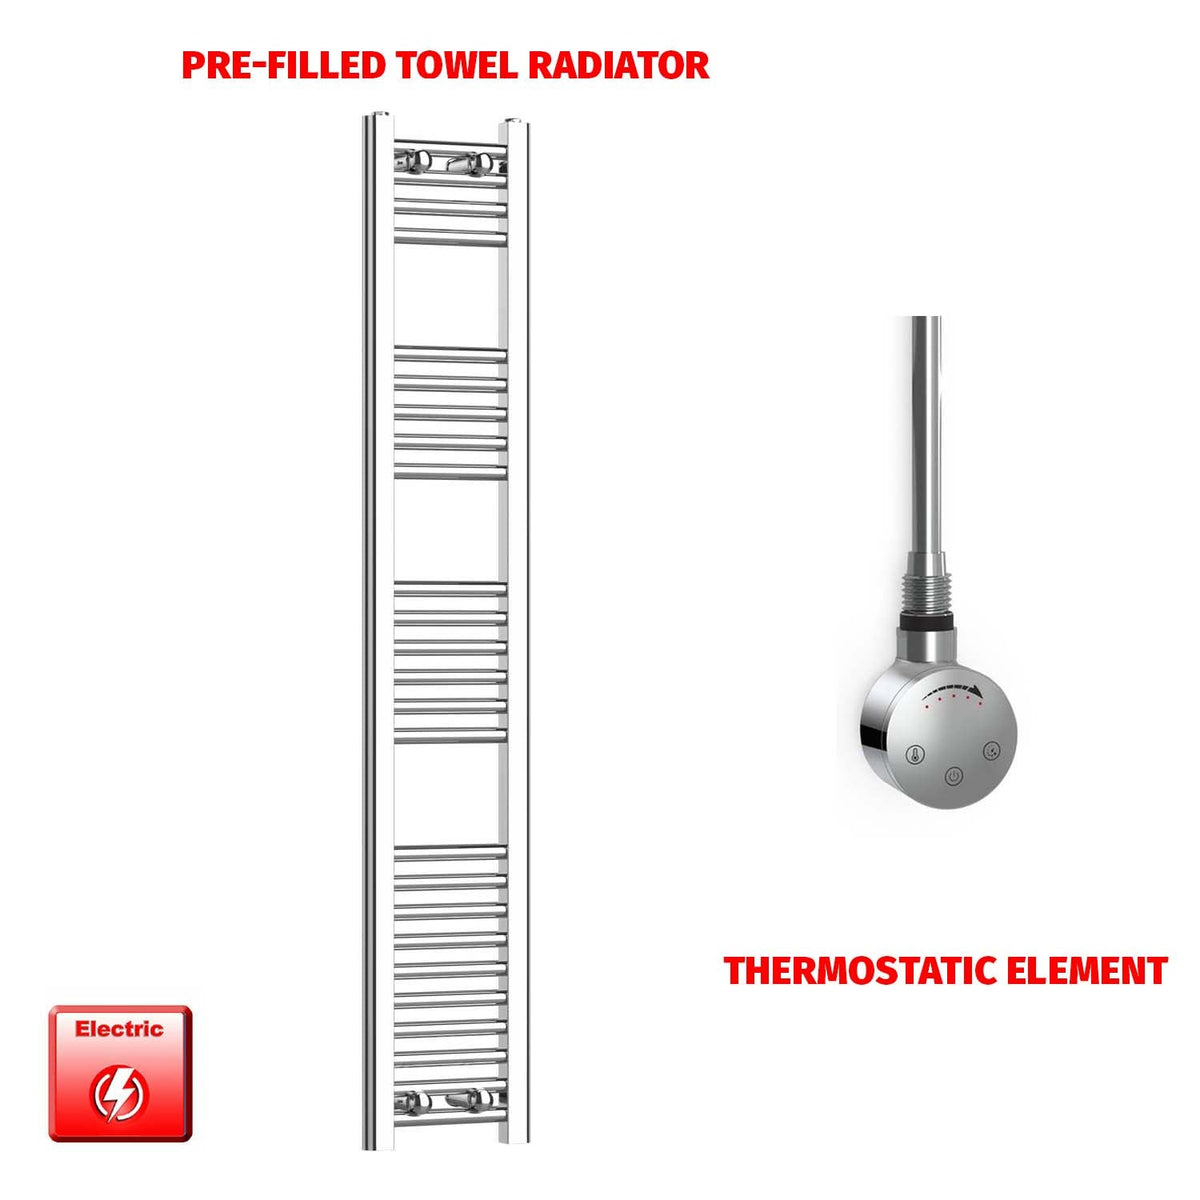 1400 x 200 Pre-Filled Electric Heated Towel Radiator Straight Chrome smart thermostatic element